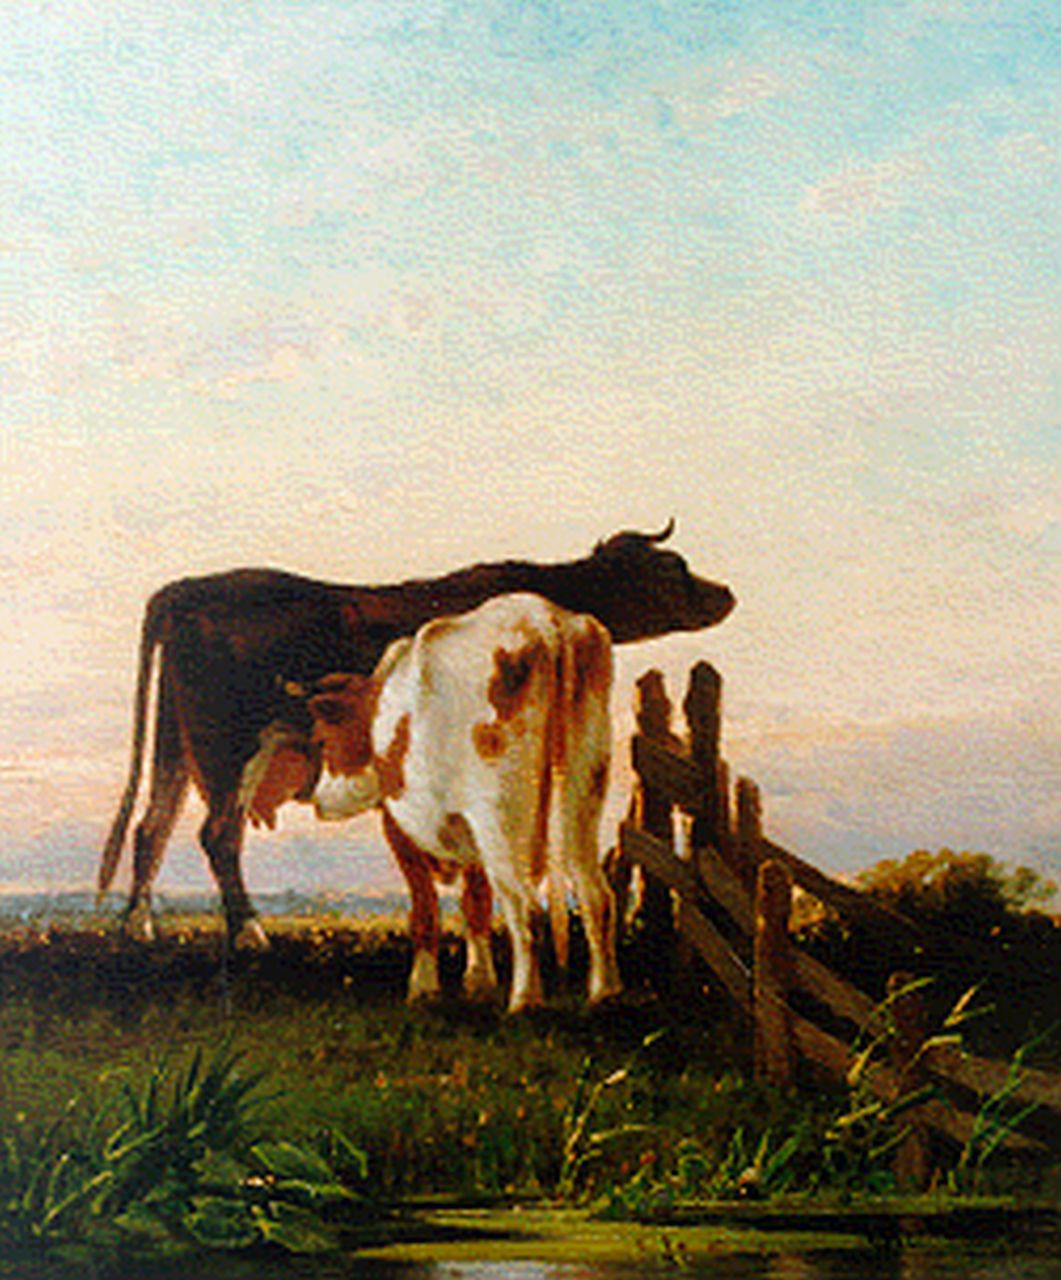 Westerbeek C.  | Cornelis Westerbeek, Cows by a fence, oil on panel 42.5 x 36.5 cm, signed l.r. and dated '81